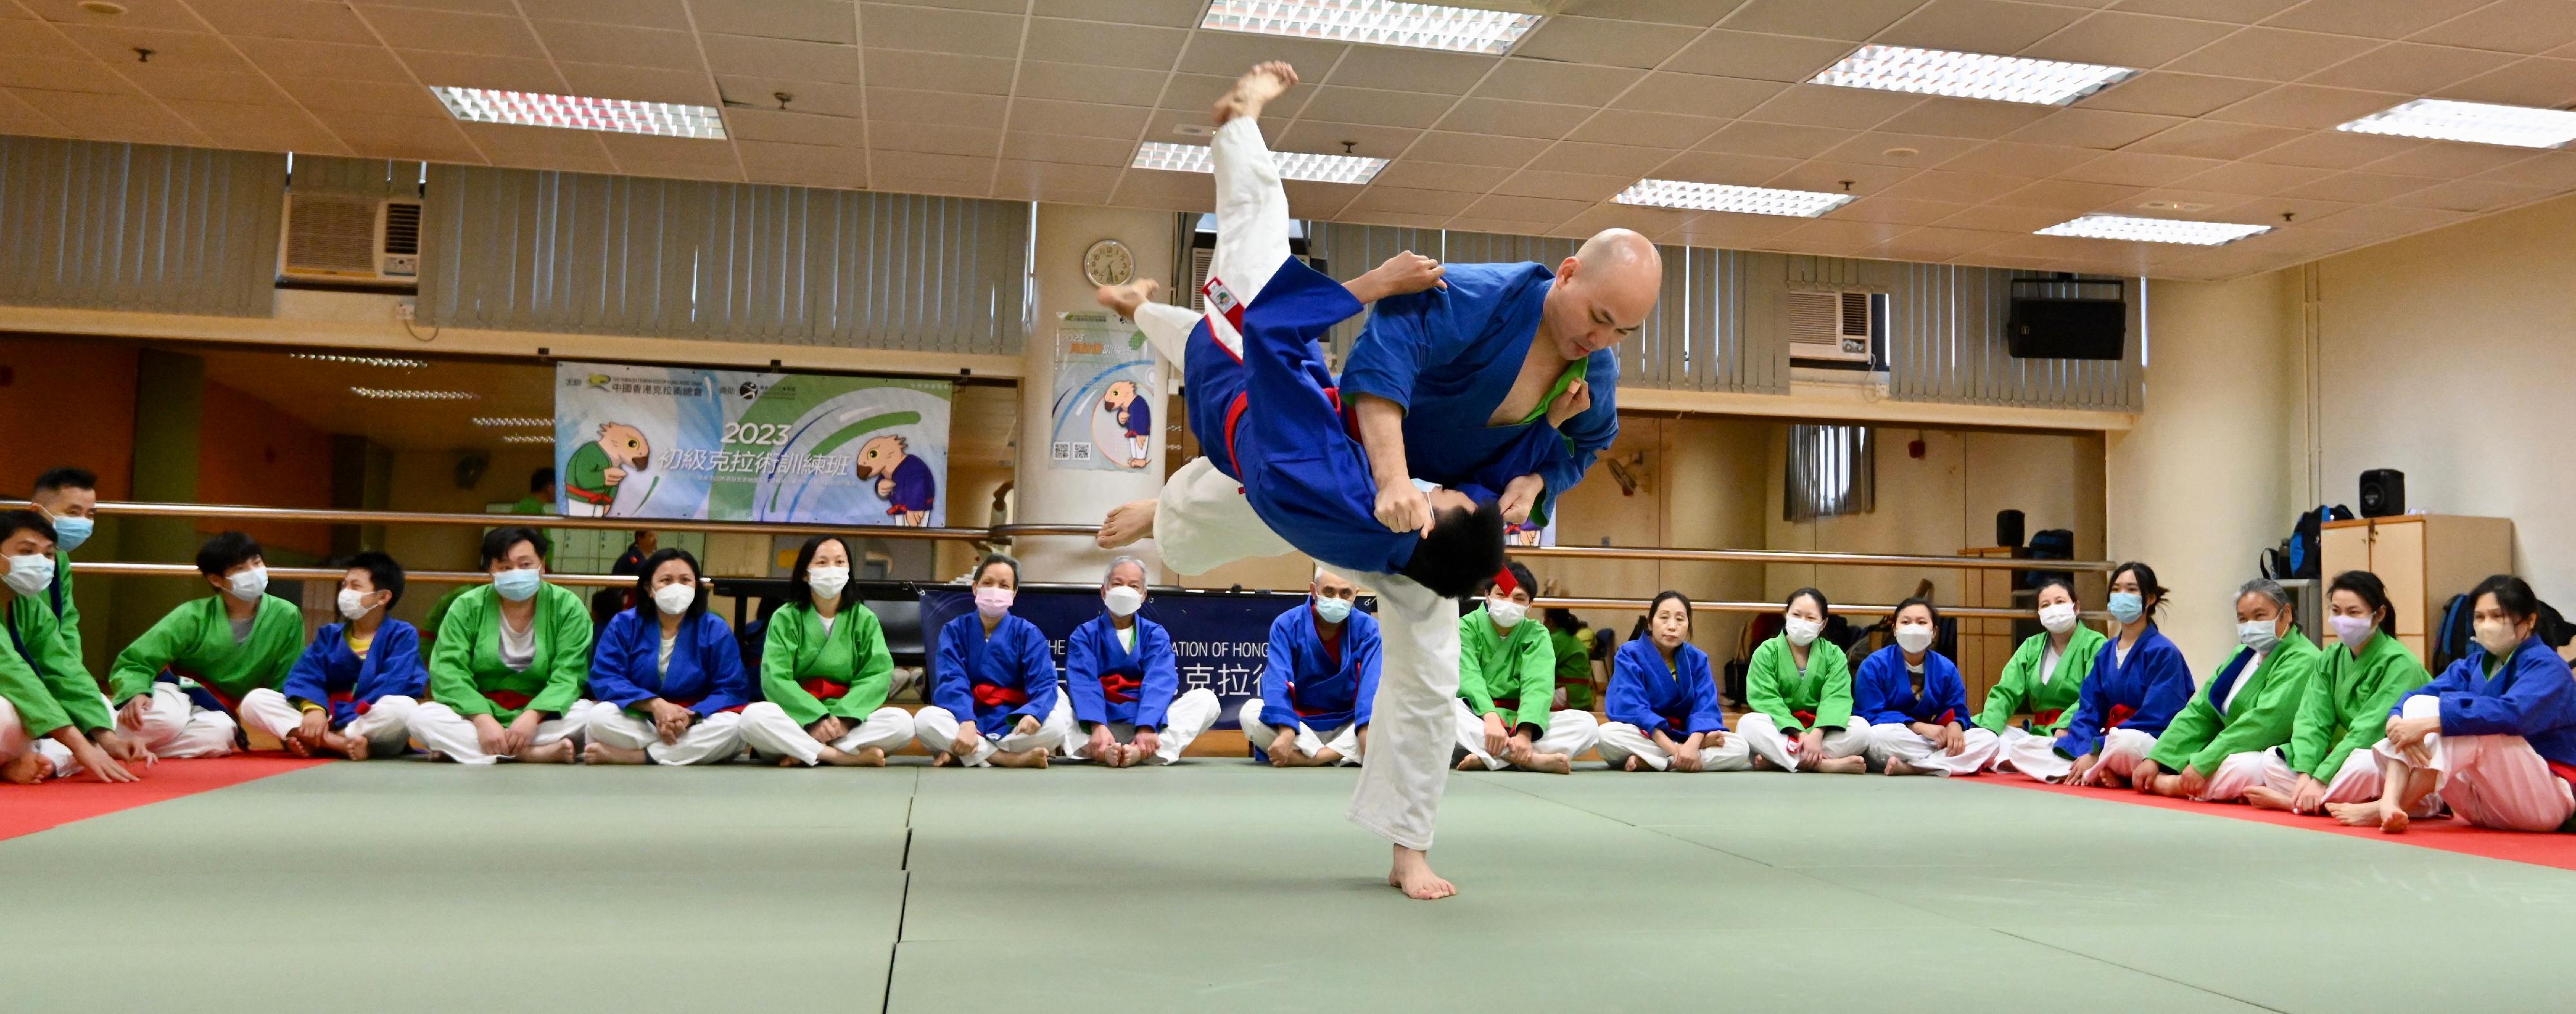 The Leisure and Cultural Services Department announced that applications for the 2024-25 Pilot Scheme on Subvention for New Sports start today (January 15) to promote the development of new sports. Photo shows "Kurash", which is a new sport subvented by the scheme earlier.